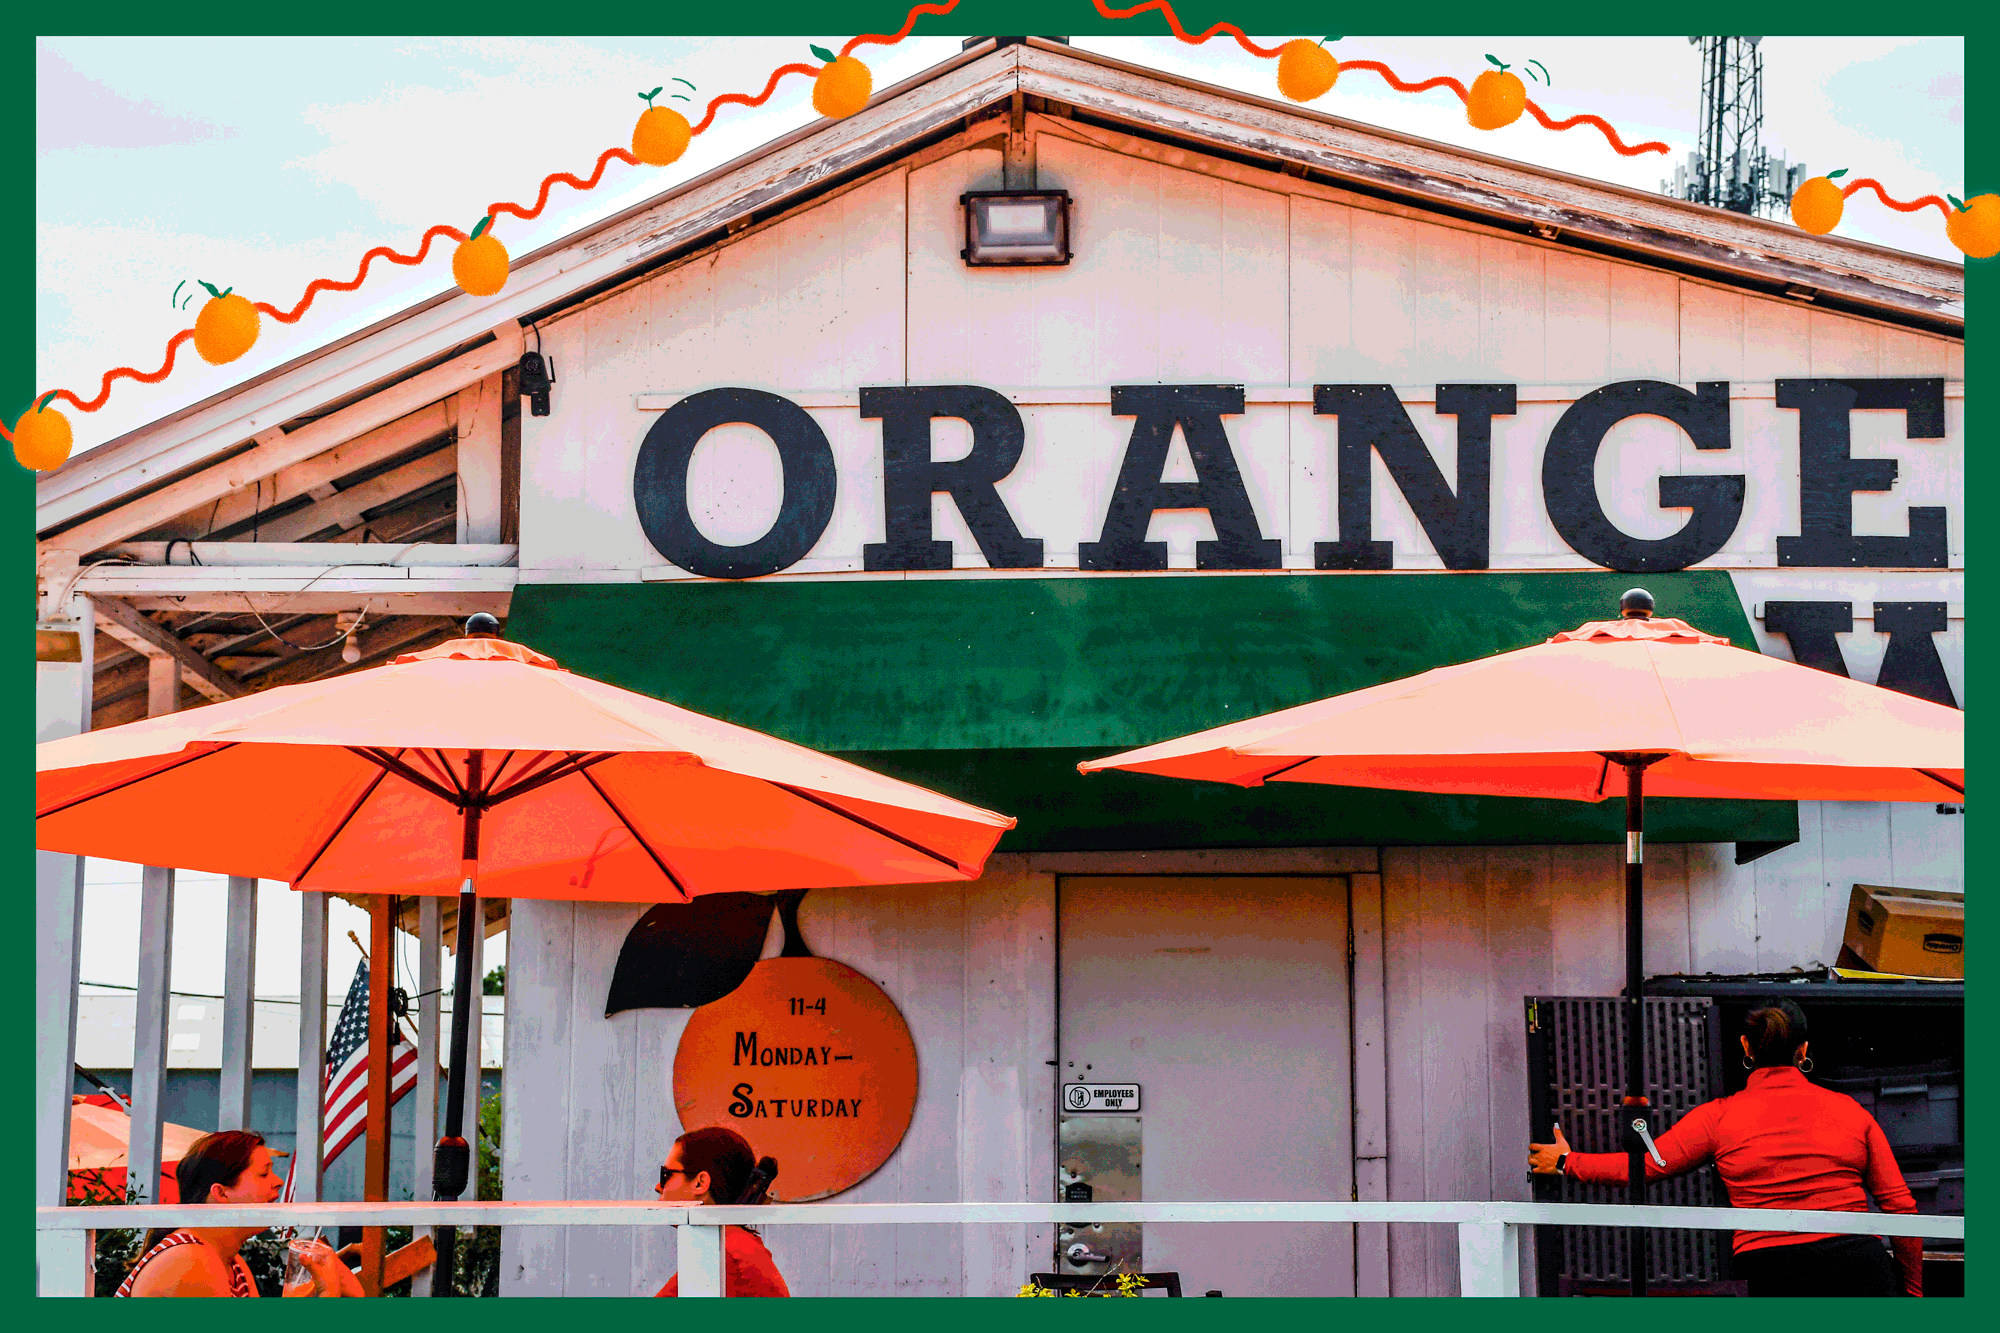 A GIF of small oranges on top of a photo of a small building with people sitting outdoors under orange umbrellas.